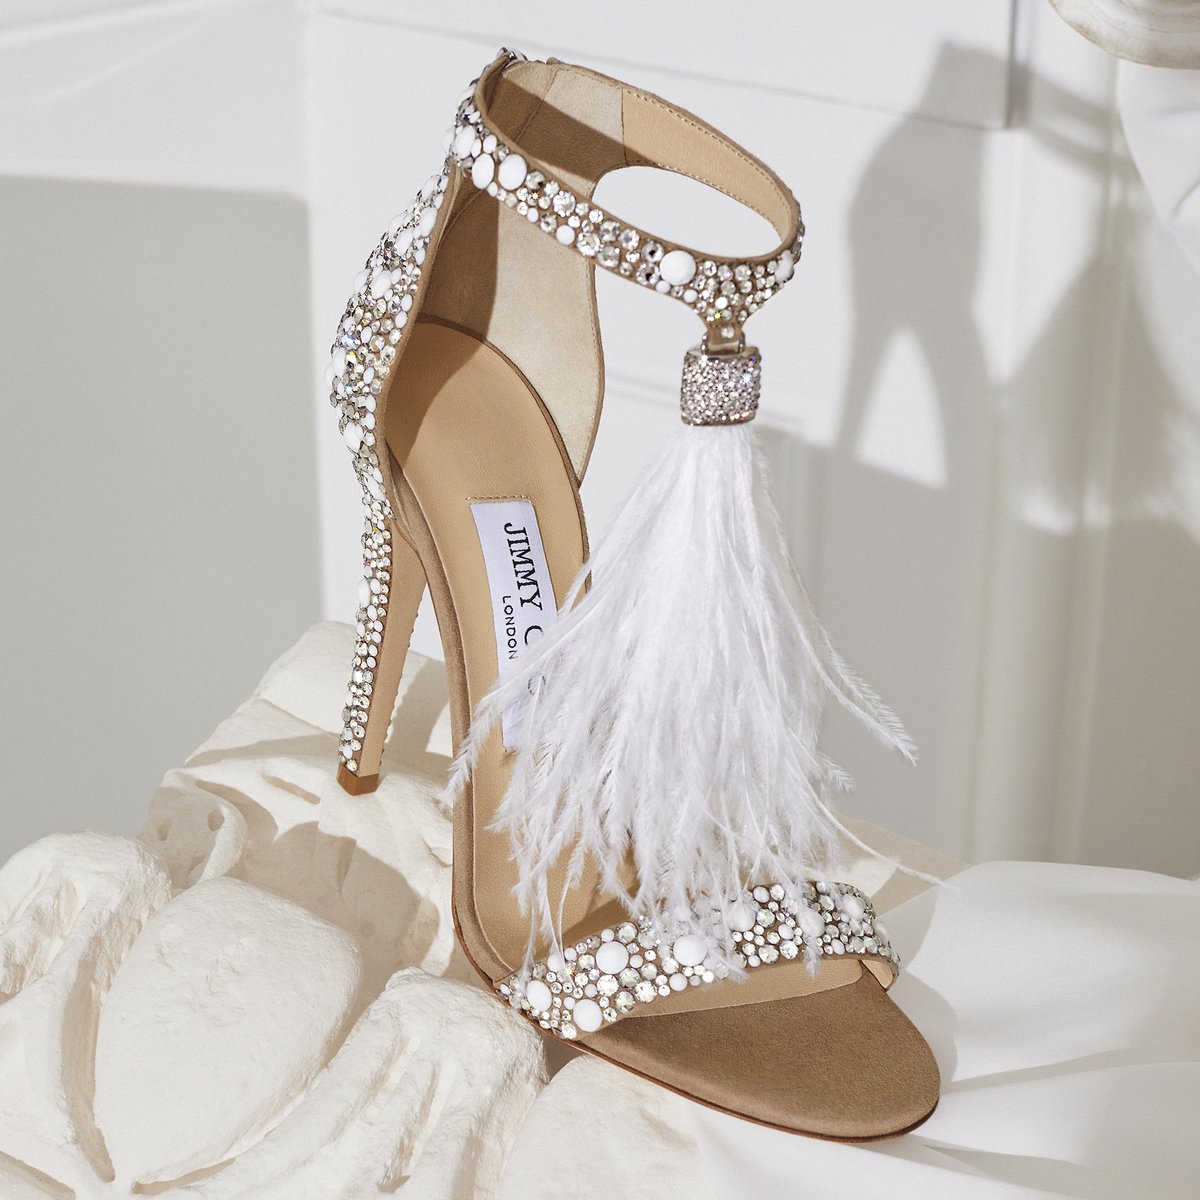 Choose the VIOLA feathered sandals for your big day and make an unforgettable entrance #IDOINCHOO #JimmyChoo bit.ly/3vWVUMz